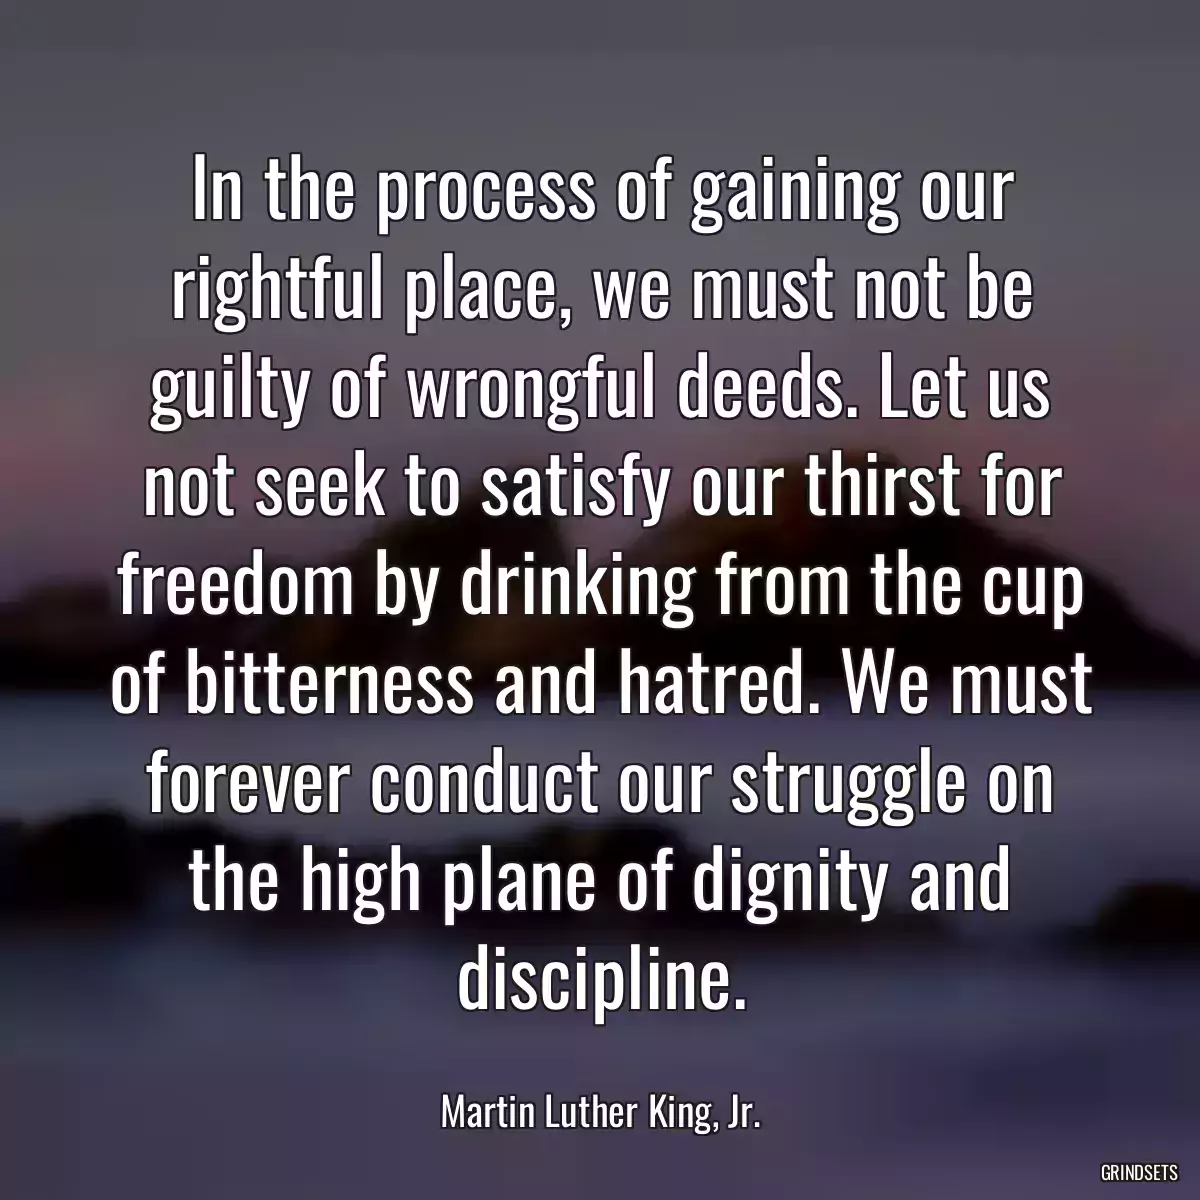 In the process of gaining our rightful place, we must not be guilty of wrongful deeds. Let us not seek to satisfy our thirst for freedom by drinking from the cup of bitterness and hatred. We must forever conduct our struggle on the high plane of dignity and discipline.